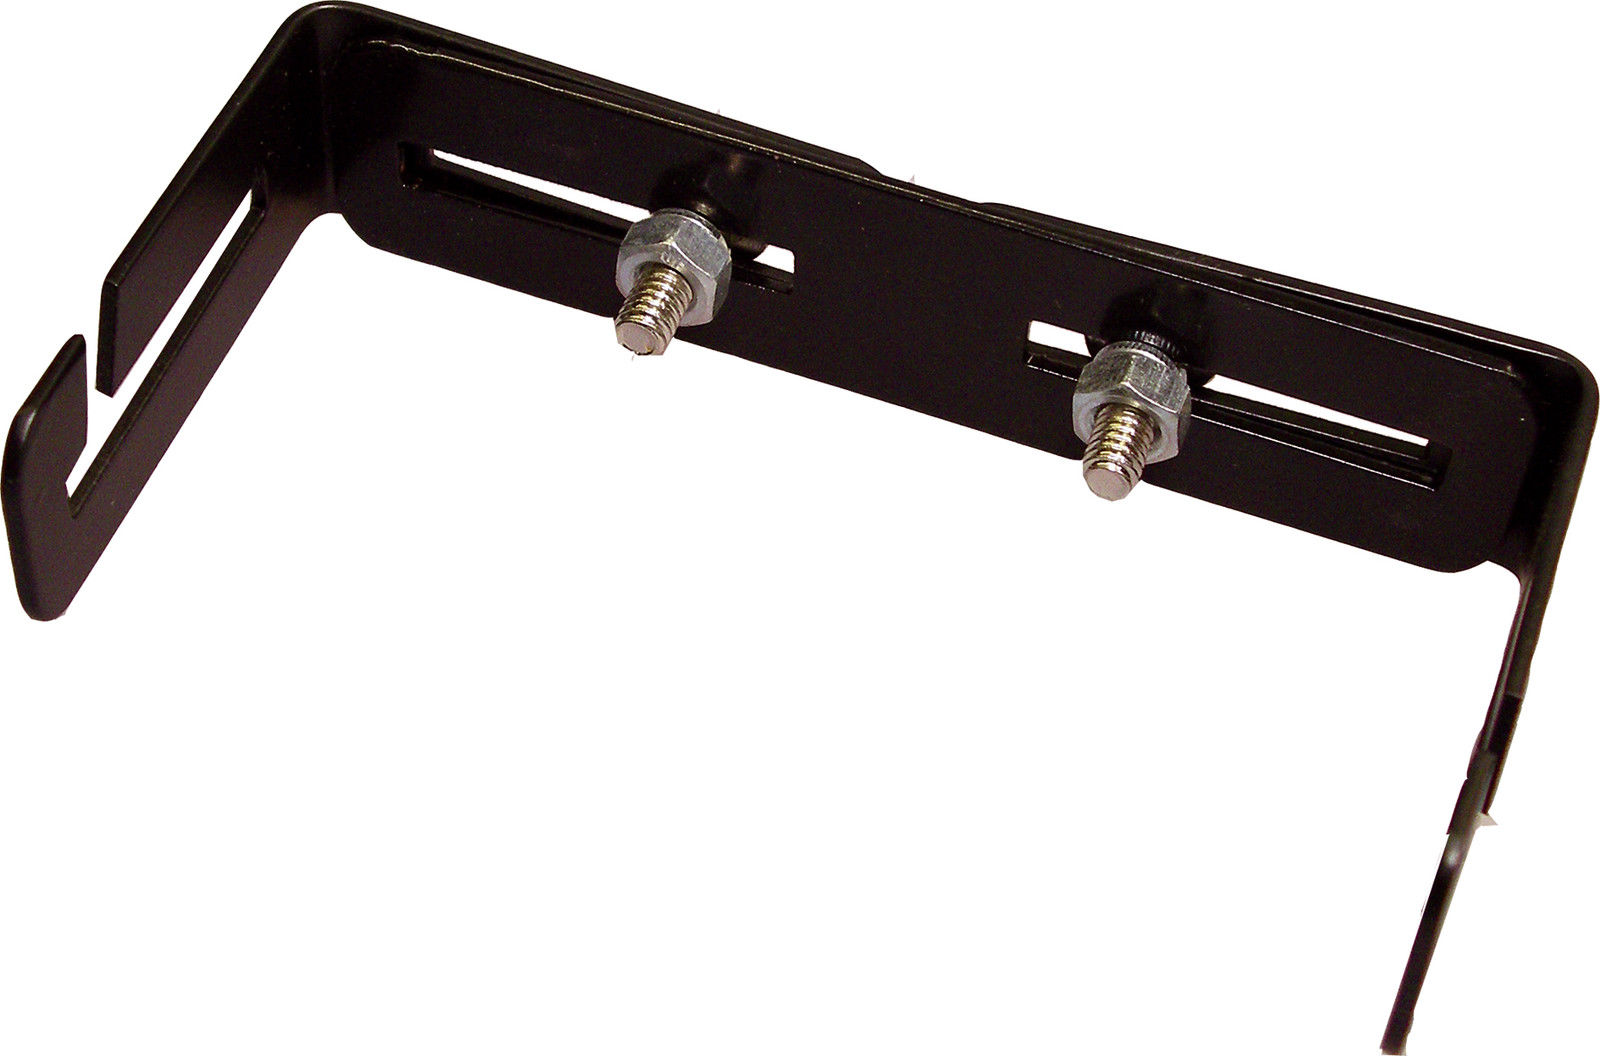 CB Radio Brackets, Chargers & Cases